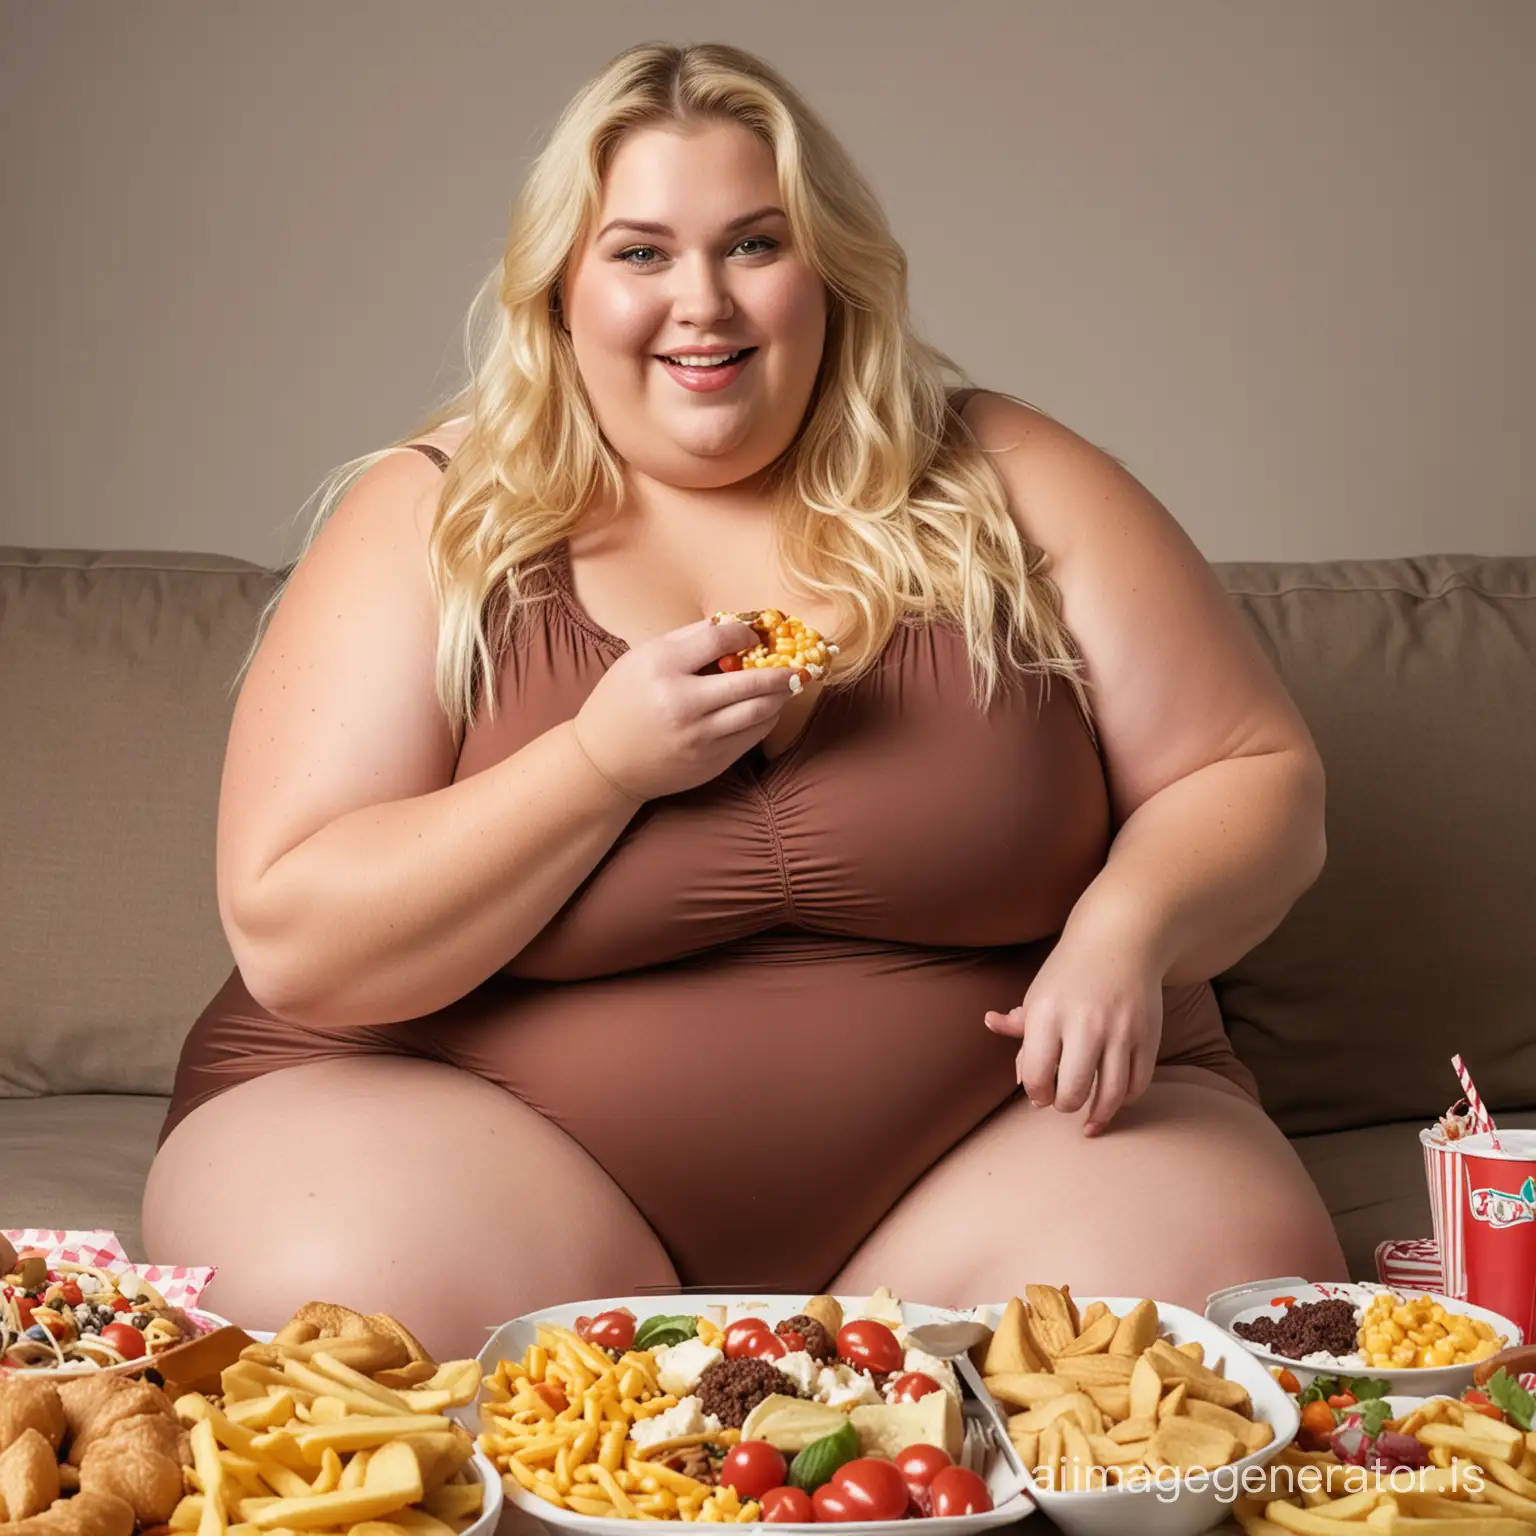 Very very obese blonde woman clothed sitting surrounded by unhealthy food smiling eating